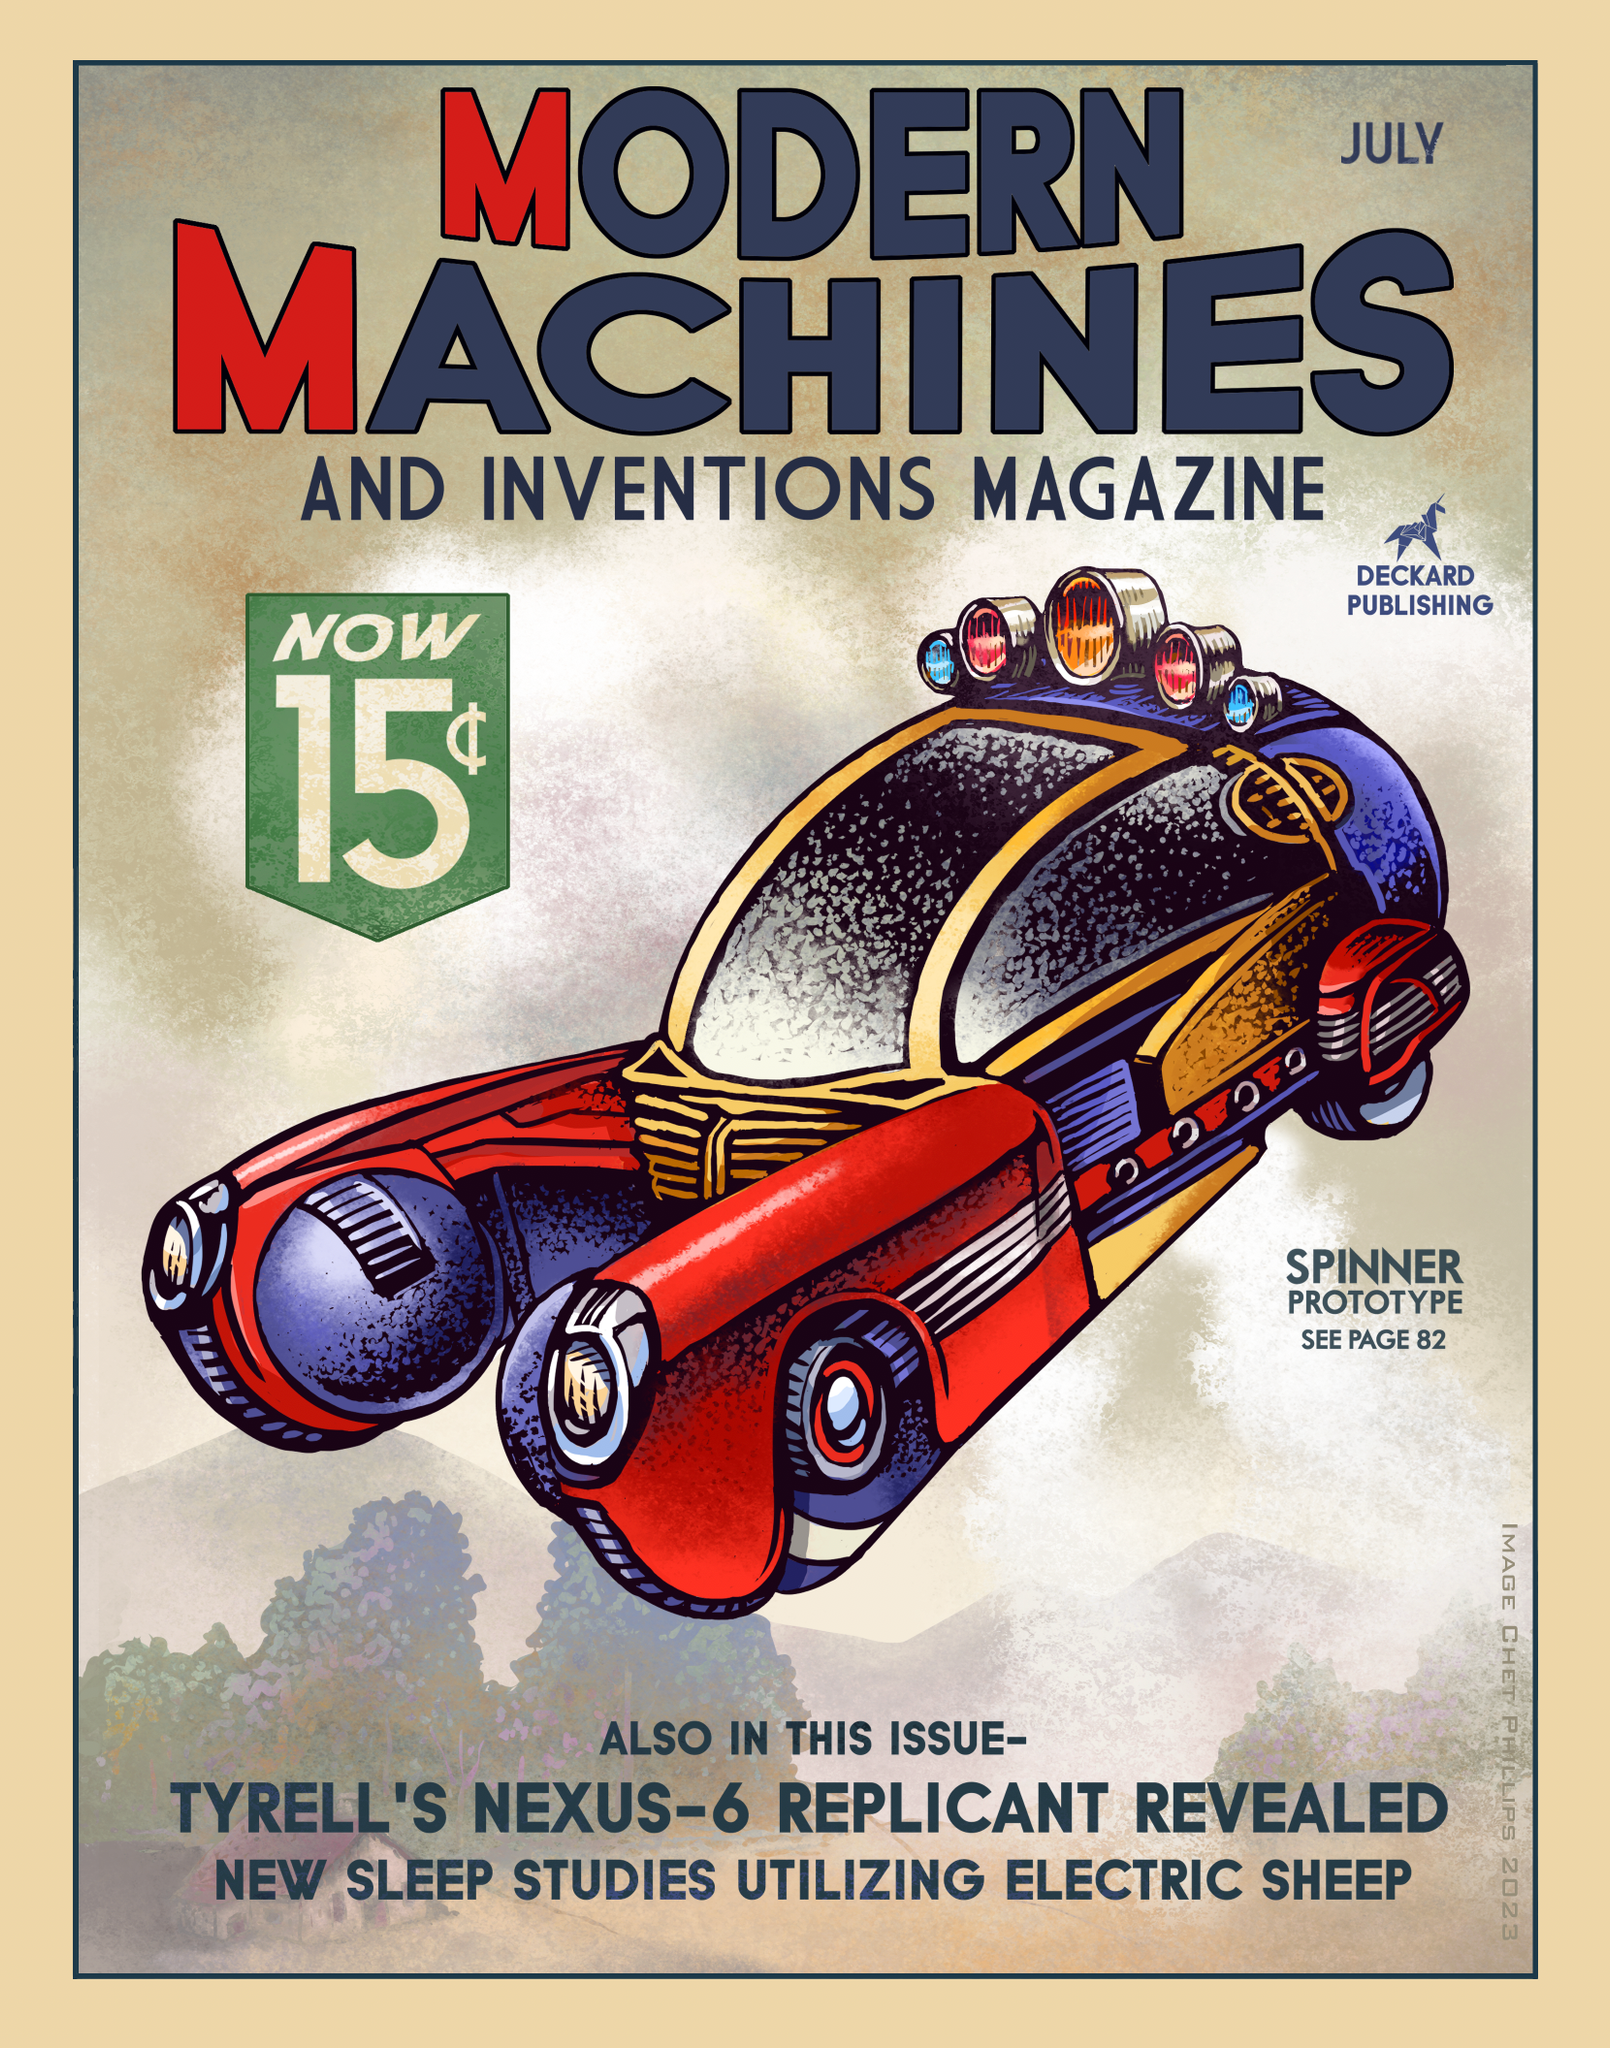 Spinner Prototype- Modern Machines and Inventions 11 x 14 signed print